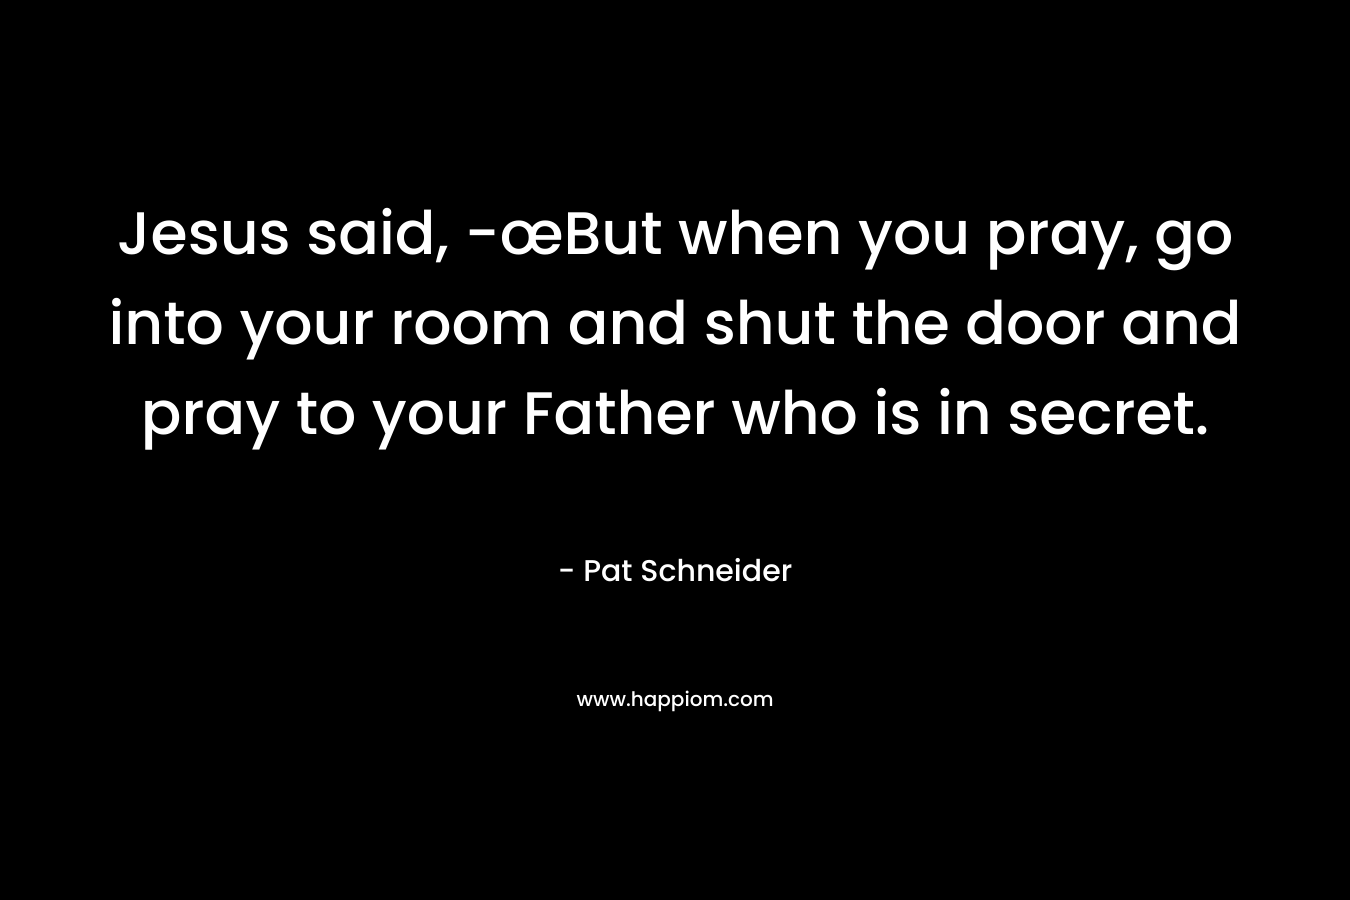 Jesus said, -œBut when you pray, go into your room and shut the door and pray to your Father who is in secret.